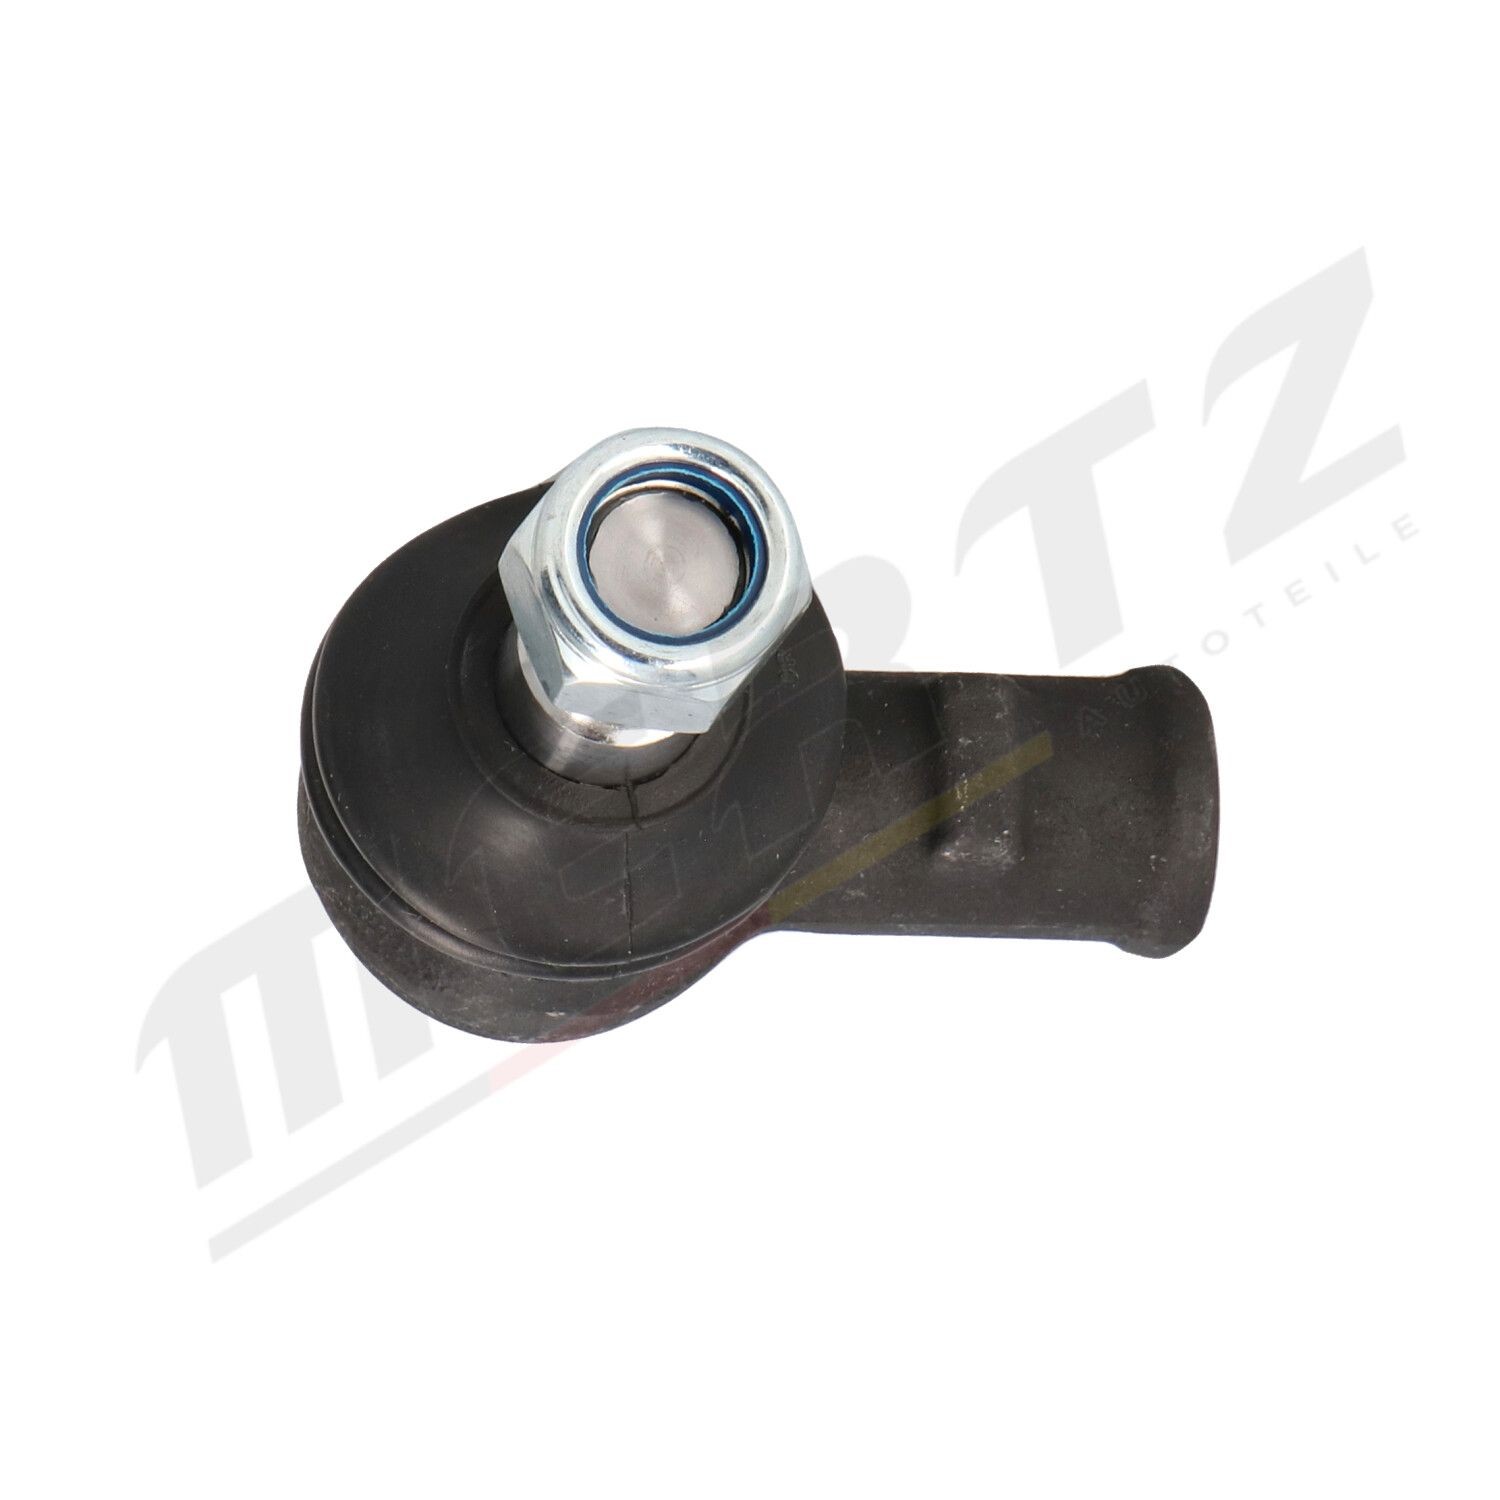 M-S0604 Tie rod end M-S0604 MERTZ M18x1,5 mm, Front Axle Left, Front Axle Right, with self-locking nut